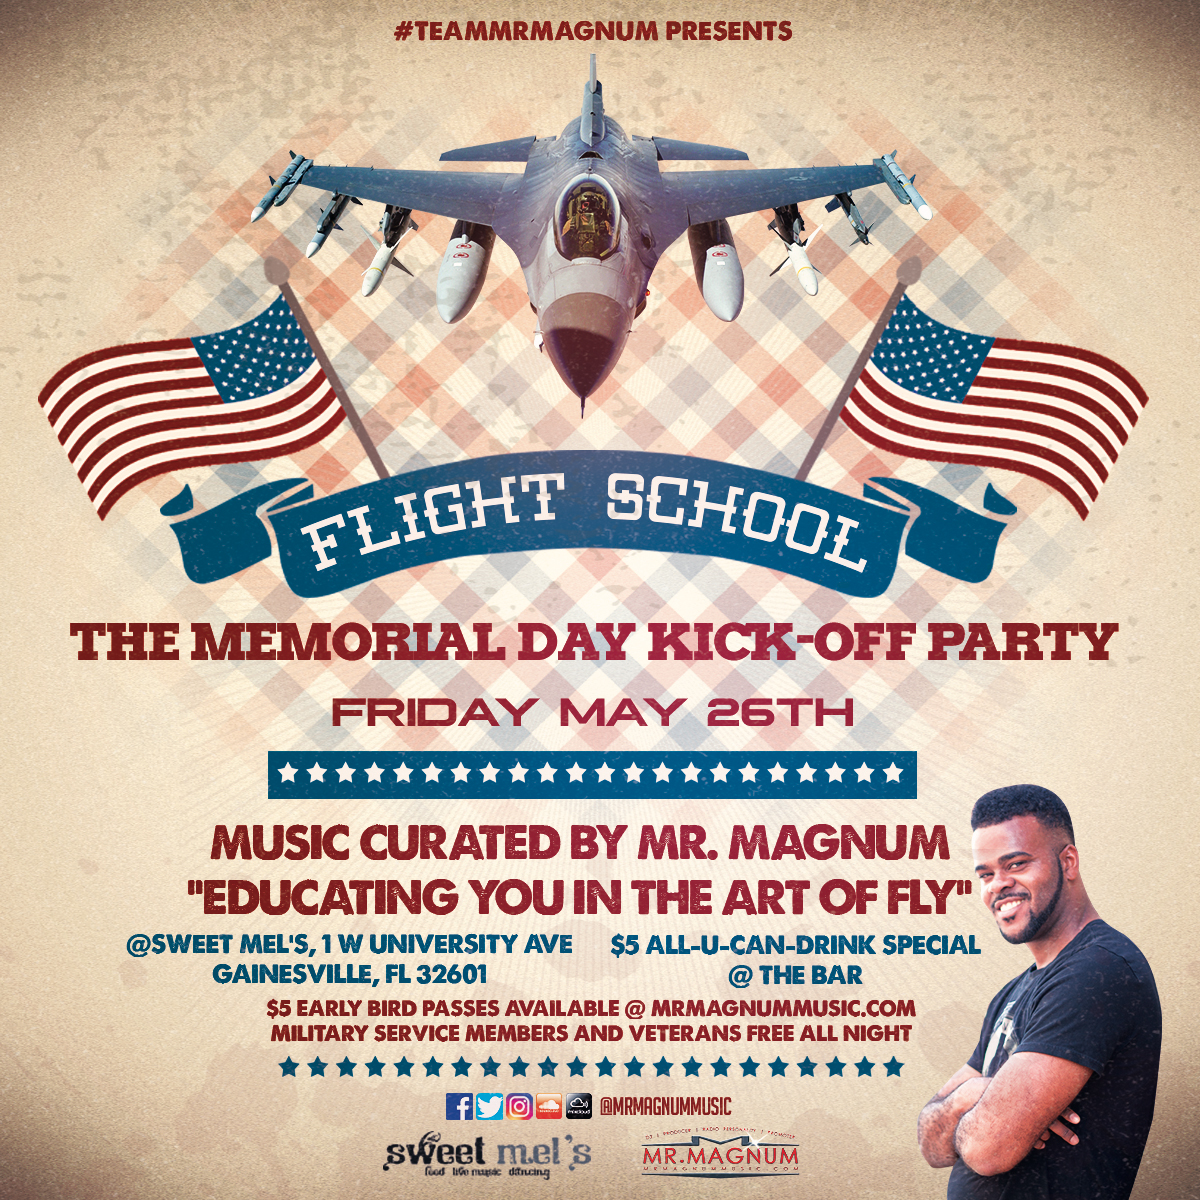 Flight School - Gainesville's Memorial Day Kickoff Party featuring your favourite DJ, Mr. Magnum from Magic 101.3